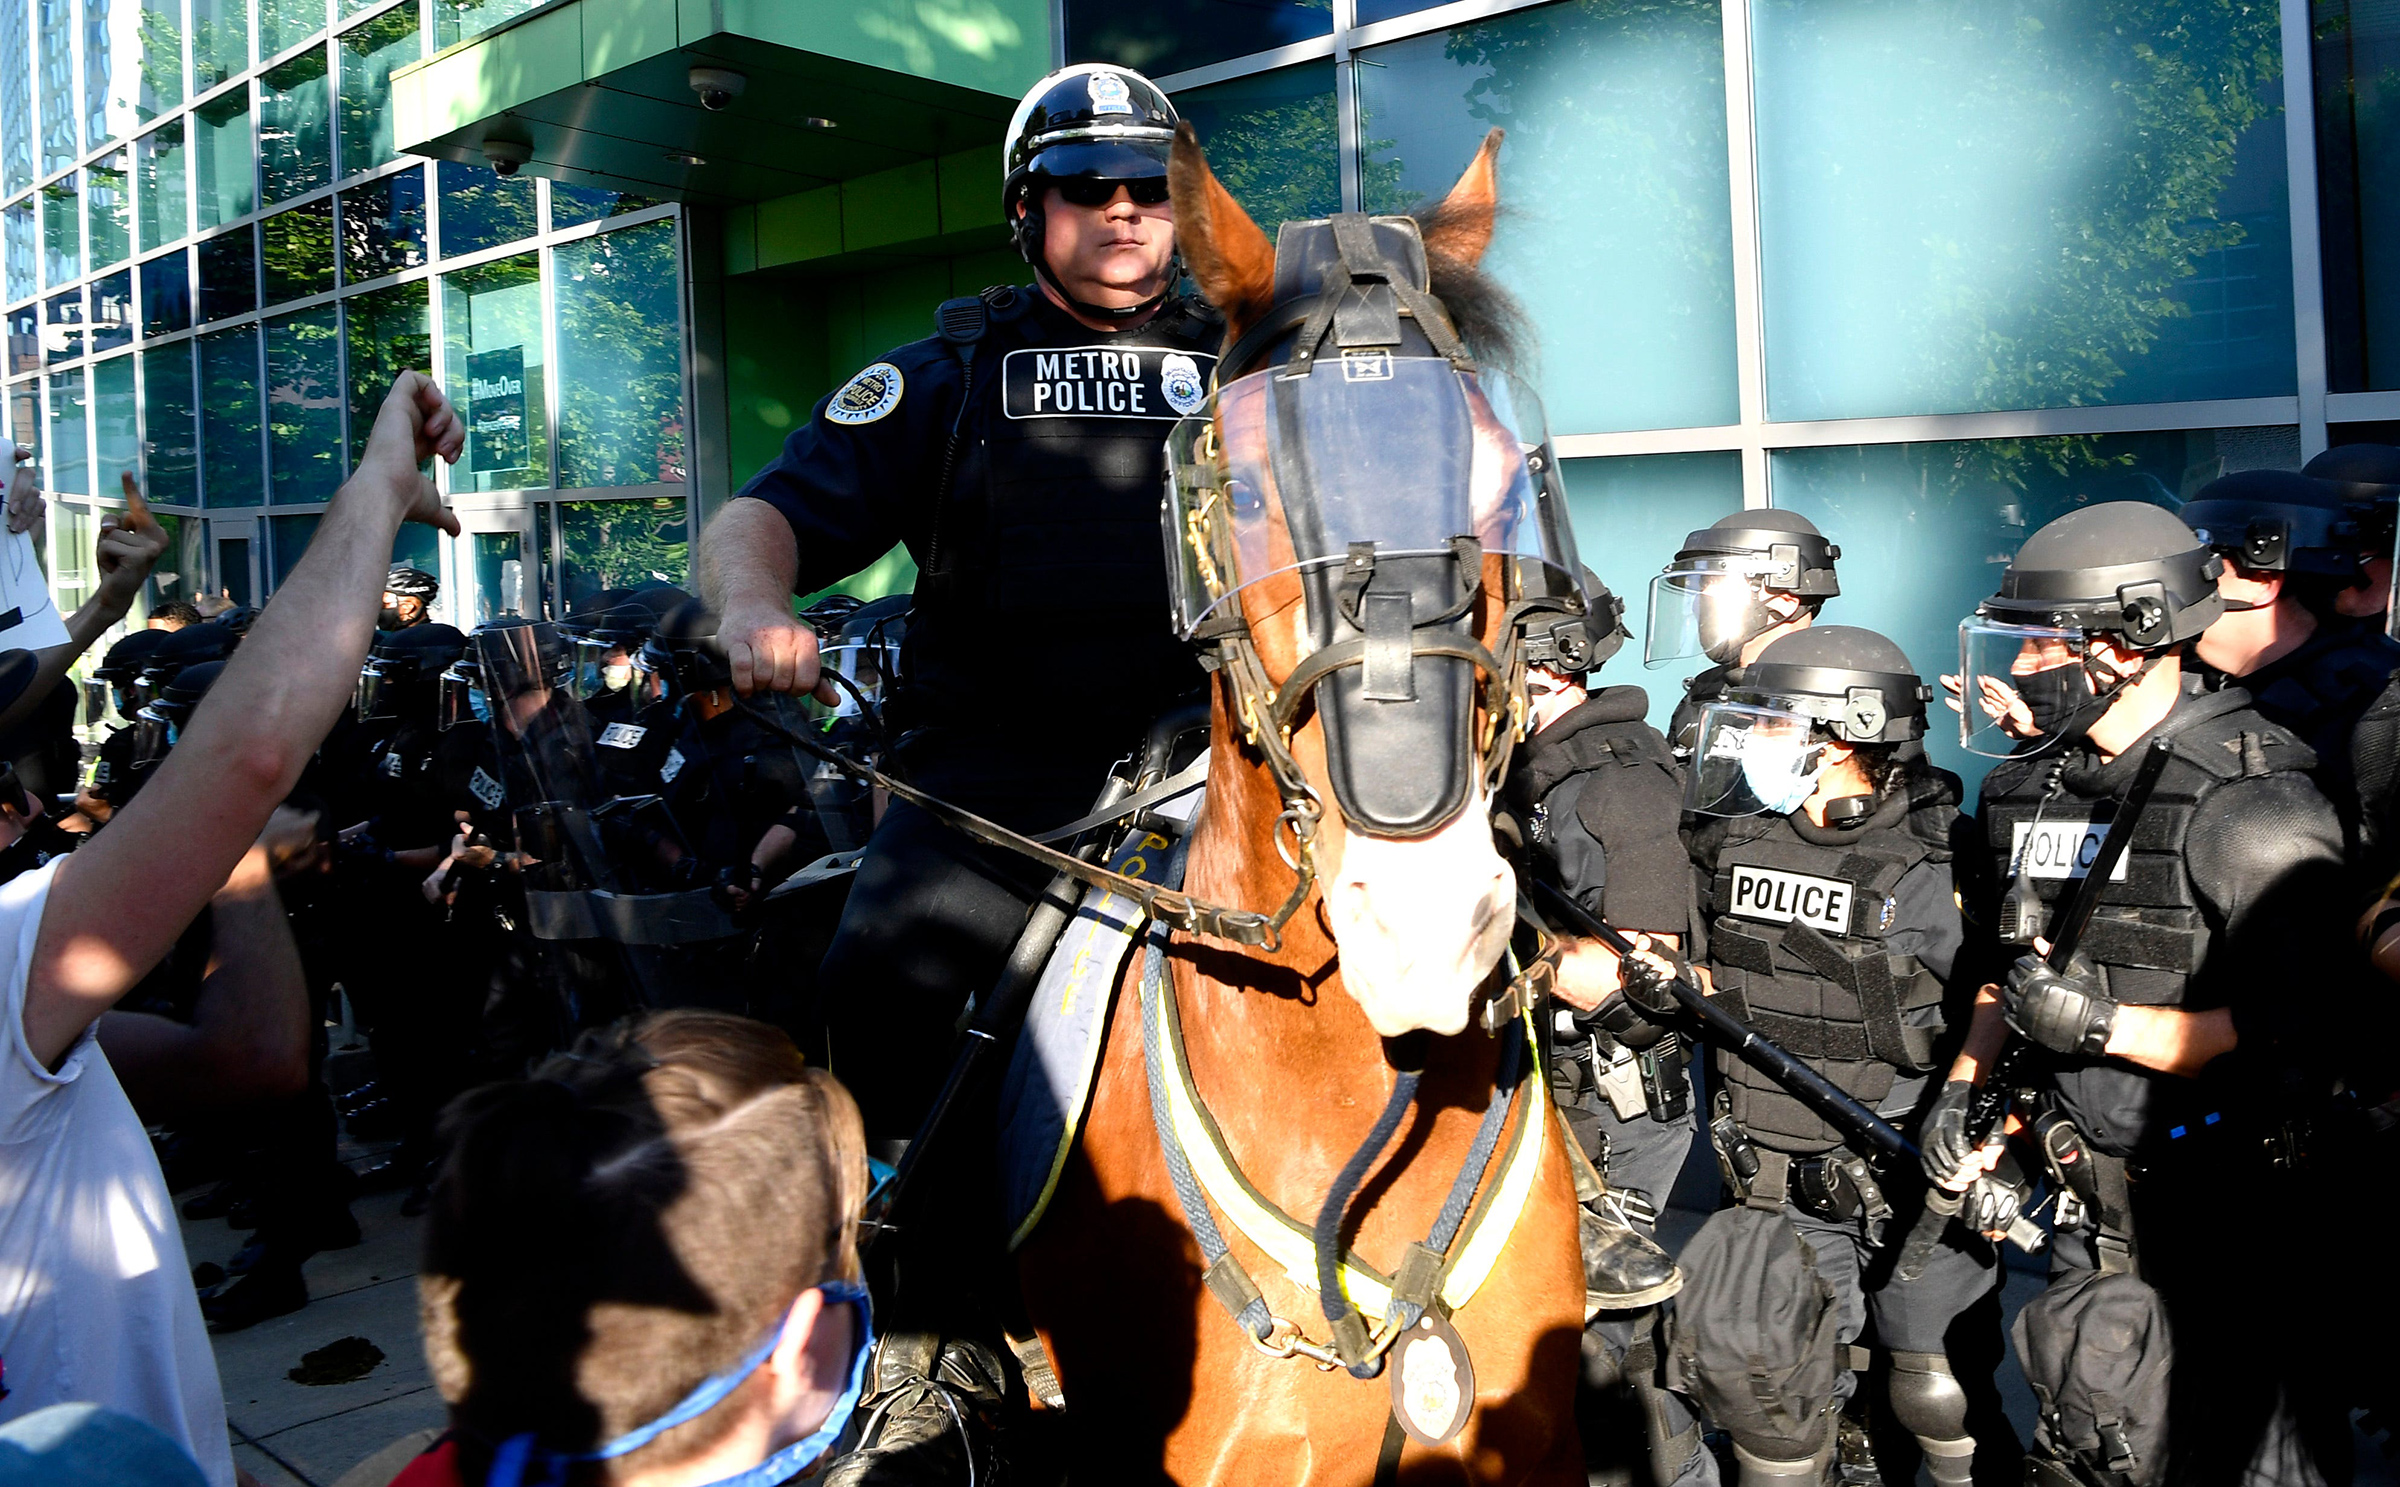 Police in riot gear and on horseback face off with protesters during a march in Nashville on May 30.